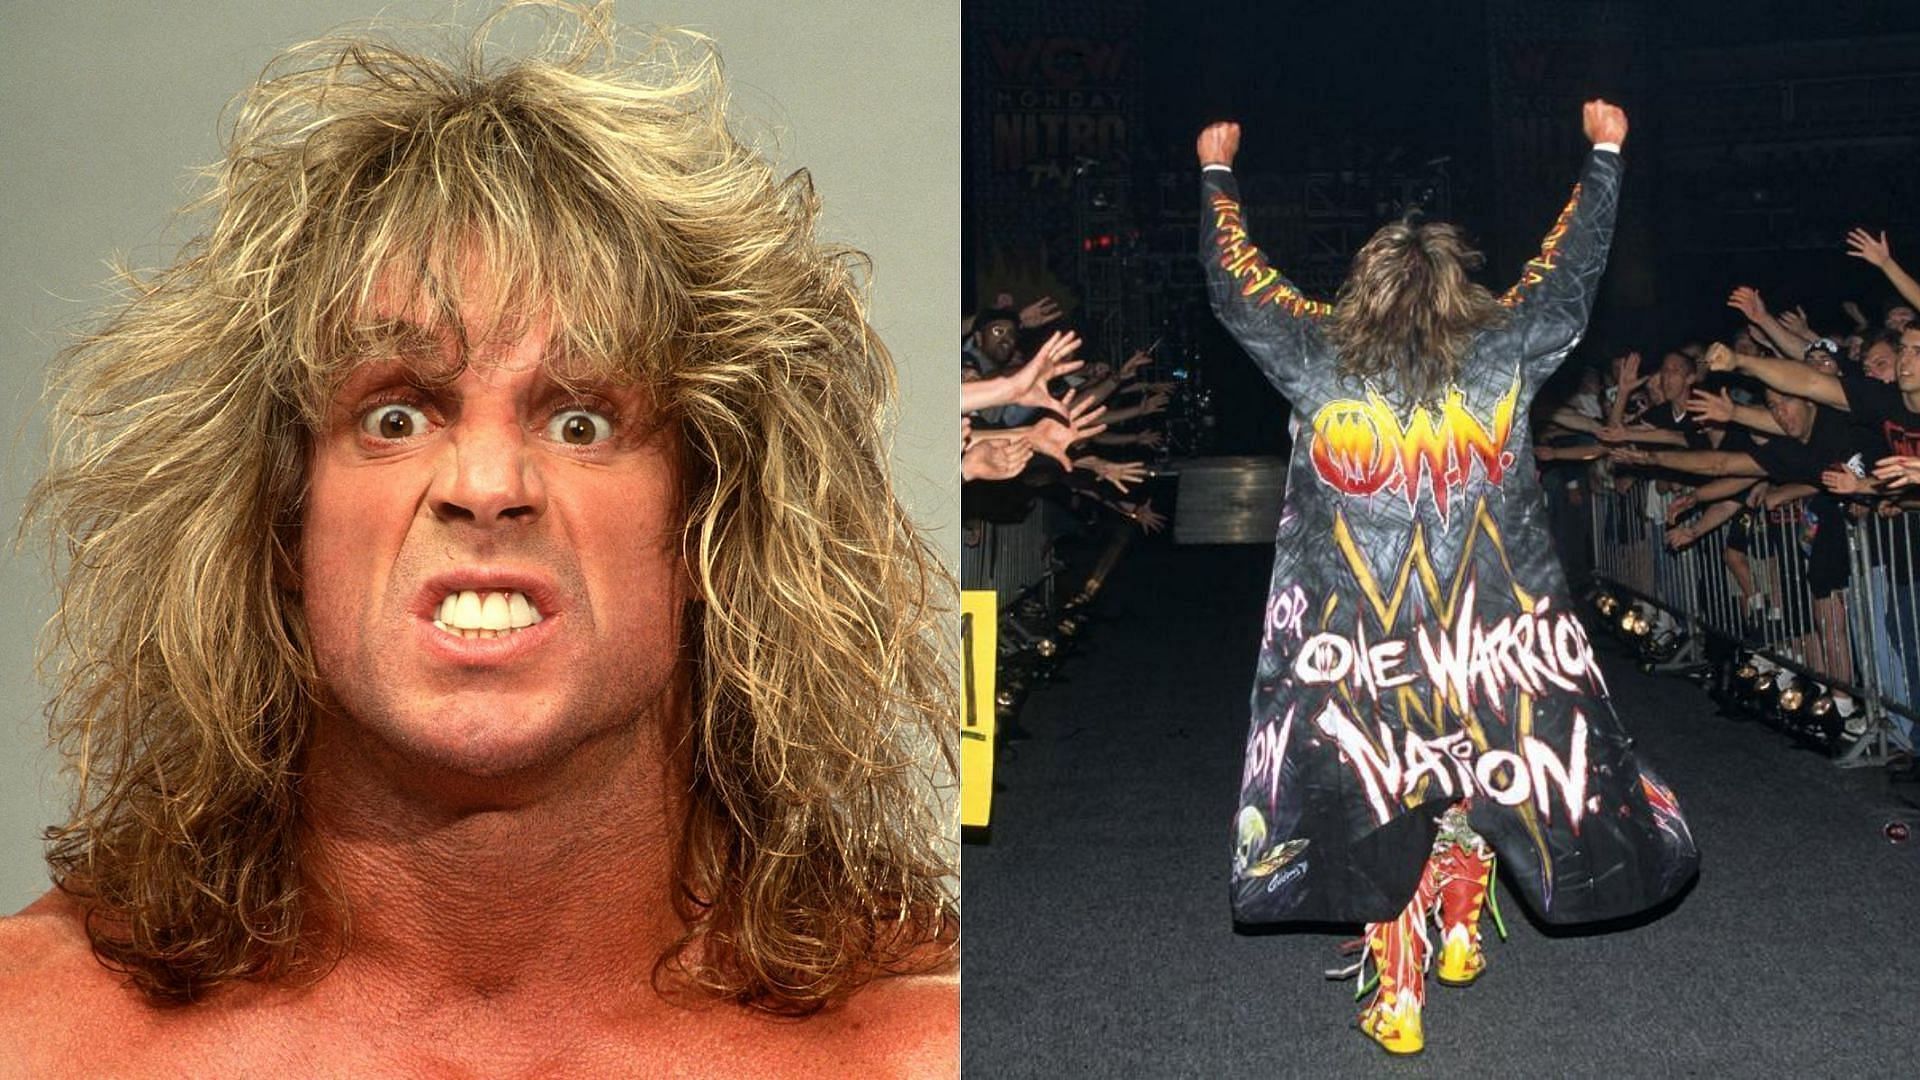 2014 WWE Hall of Famer The Ultimate Warrior